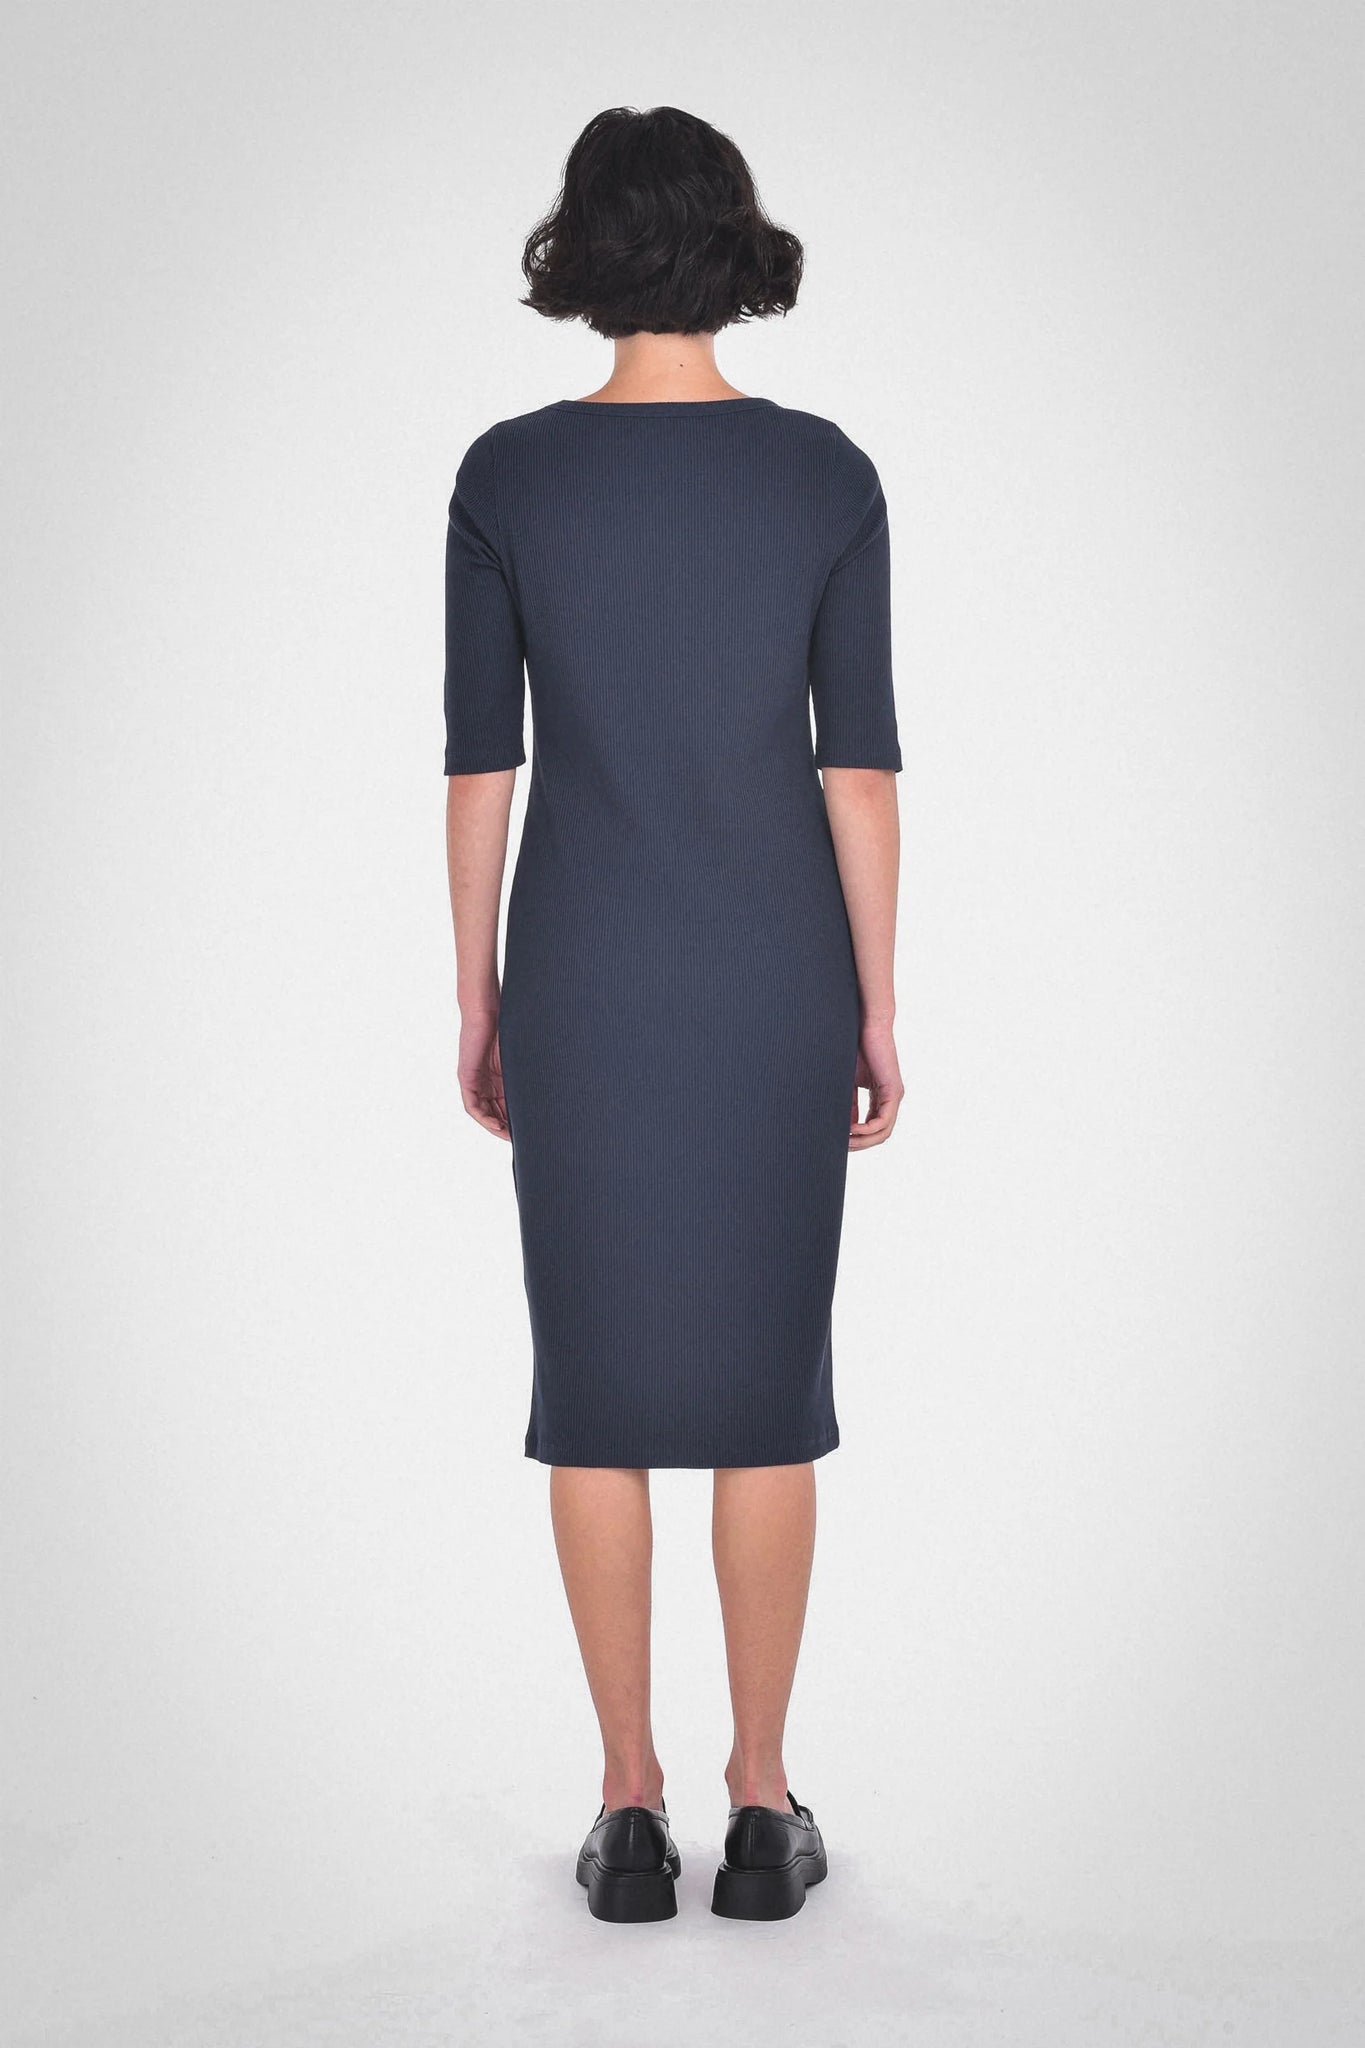 Veronica Dress in Navy From Paper Label available at UniKoncept in Waterloo back view